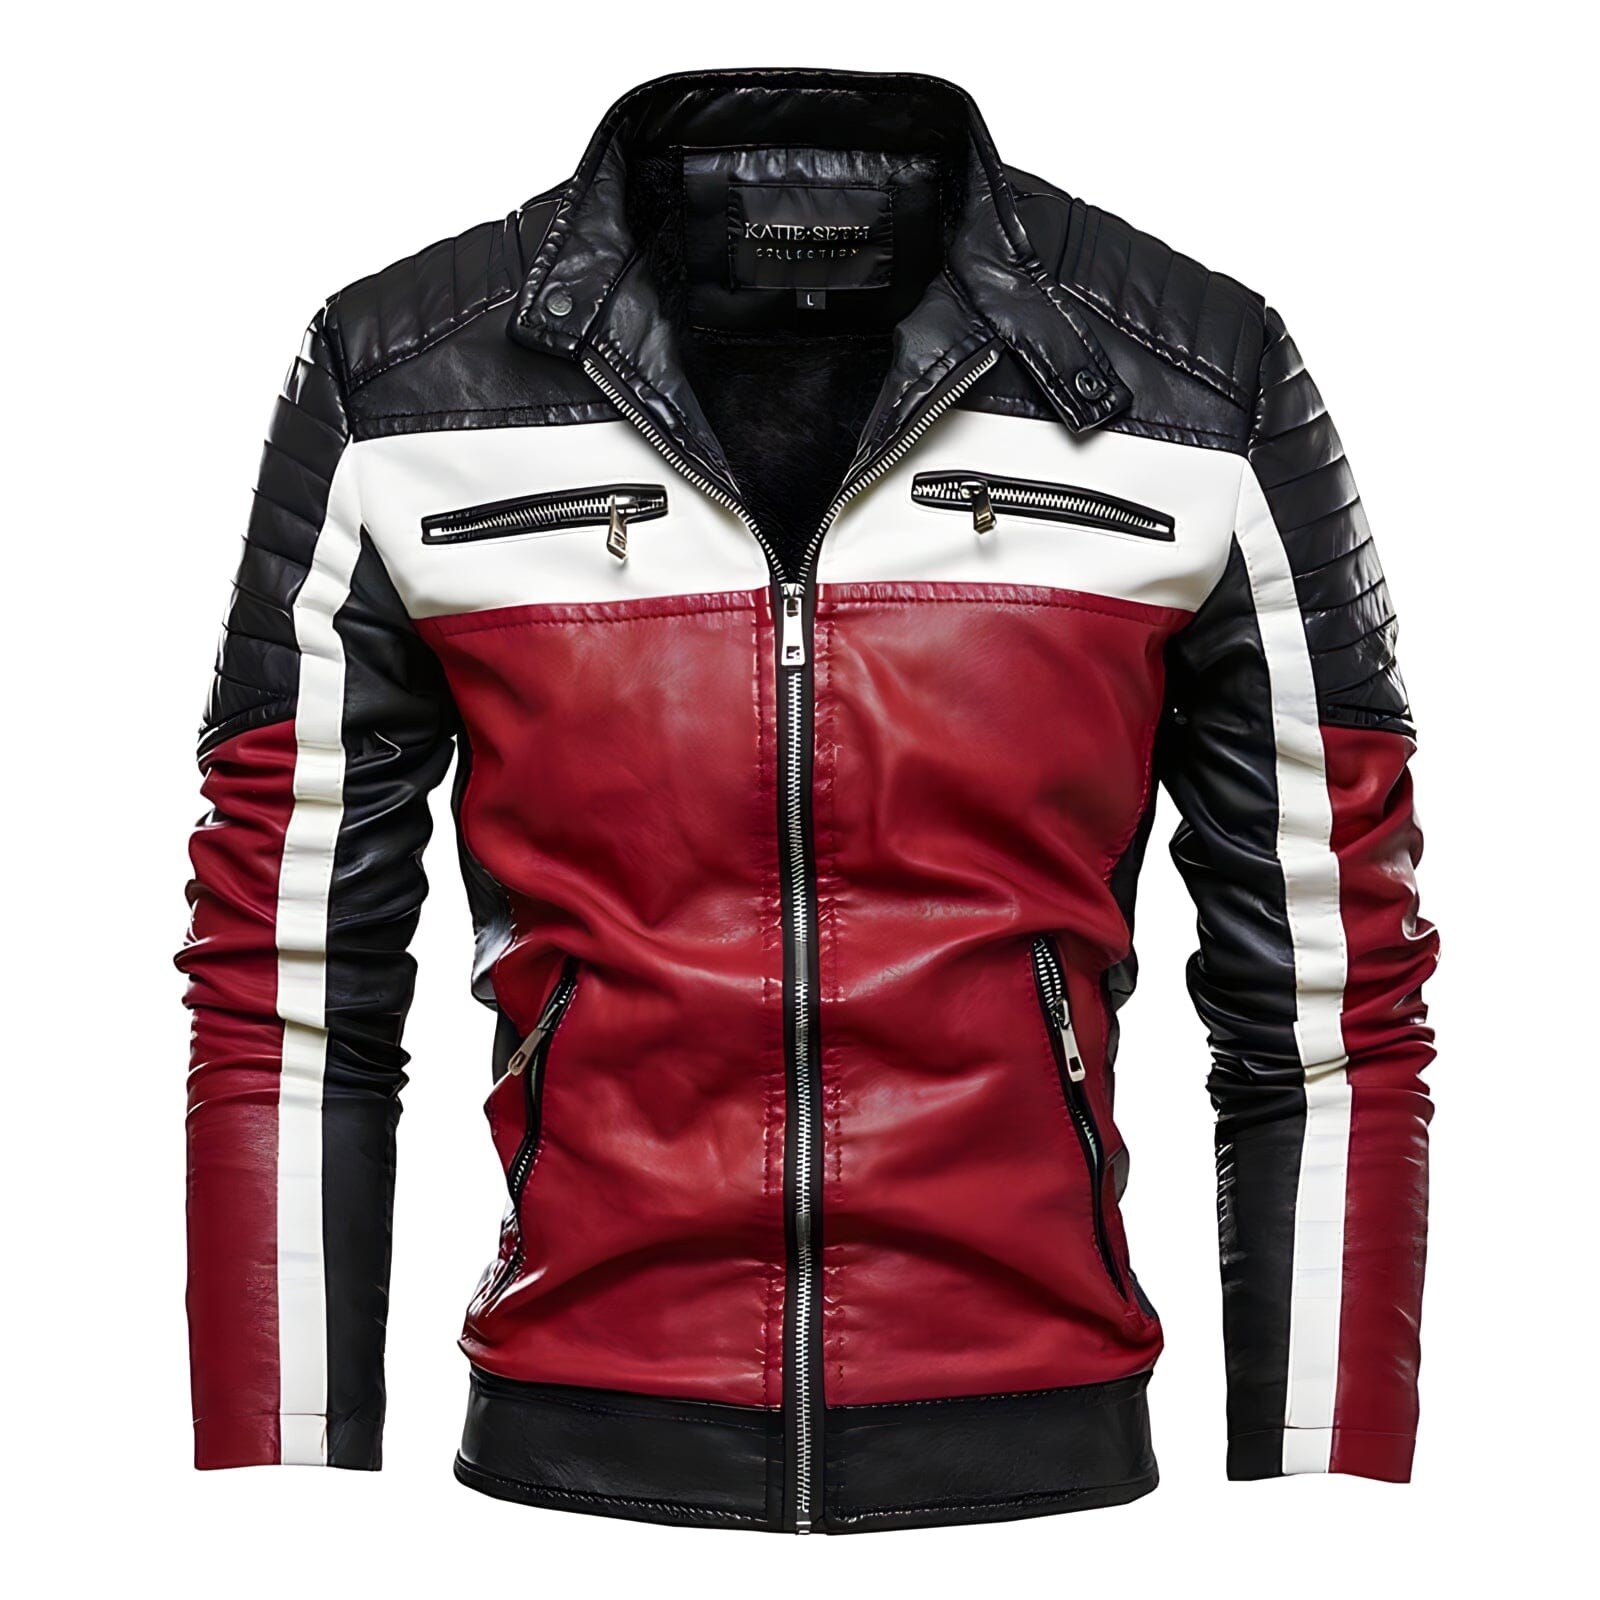 The Giancarlo Faux Leather Biker Jacket - Multiple Colors Shop5798684 Store Red L 